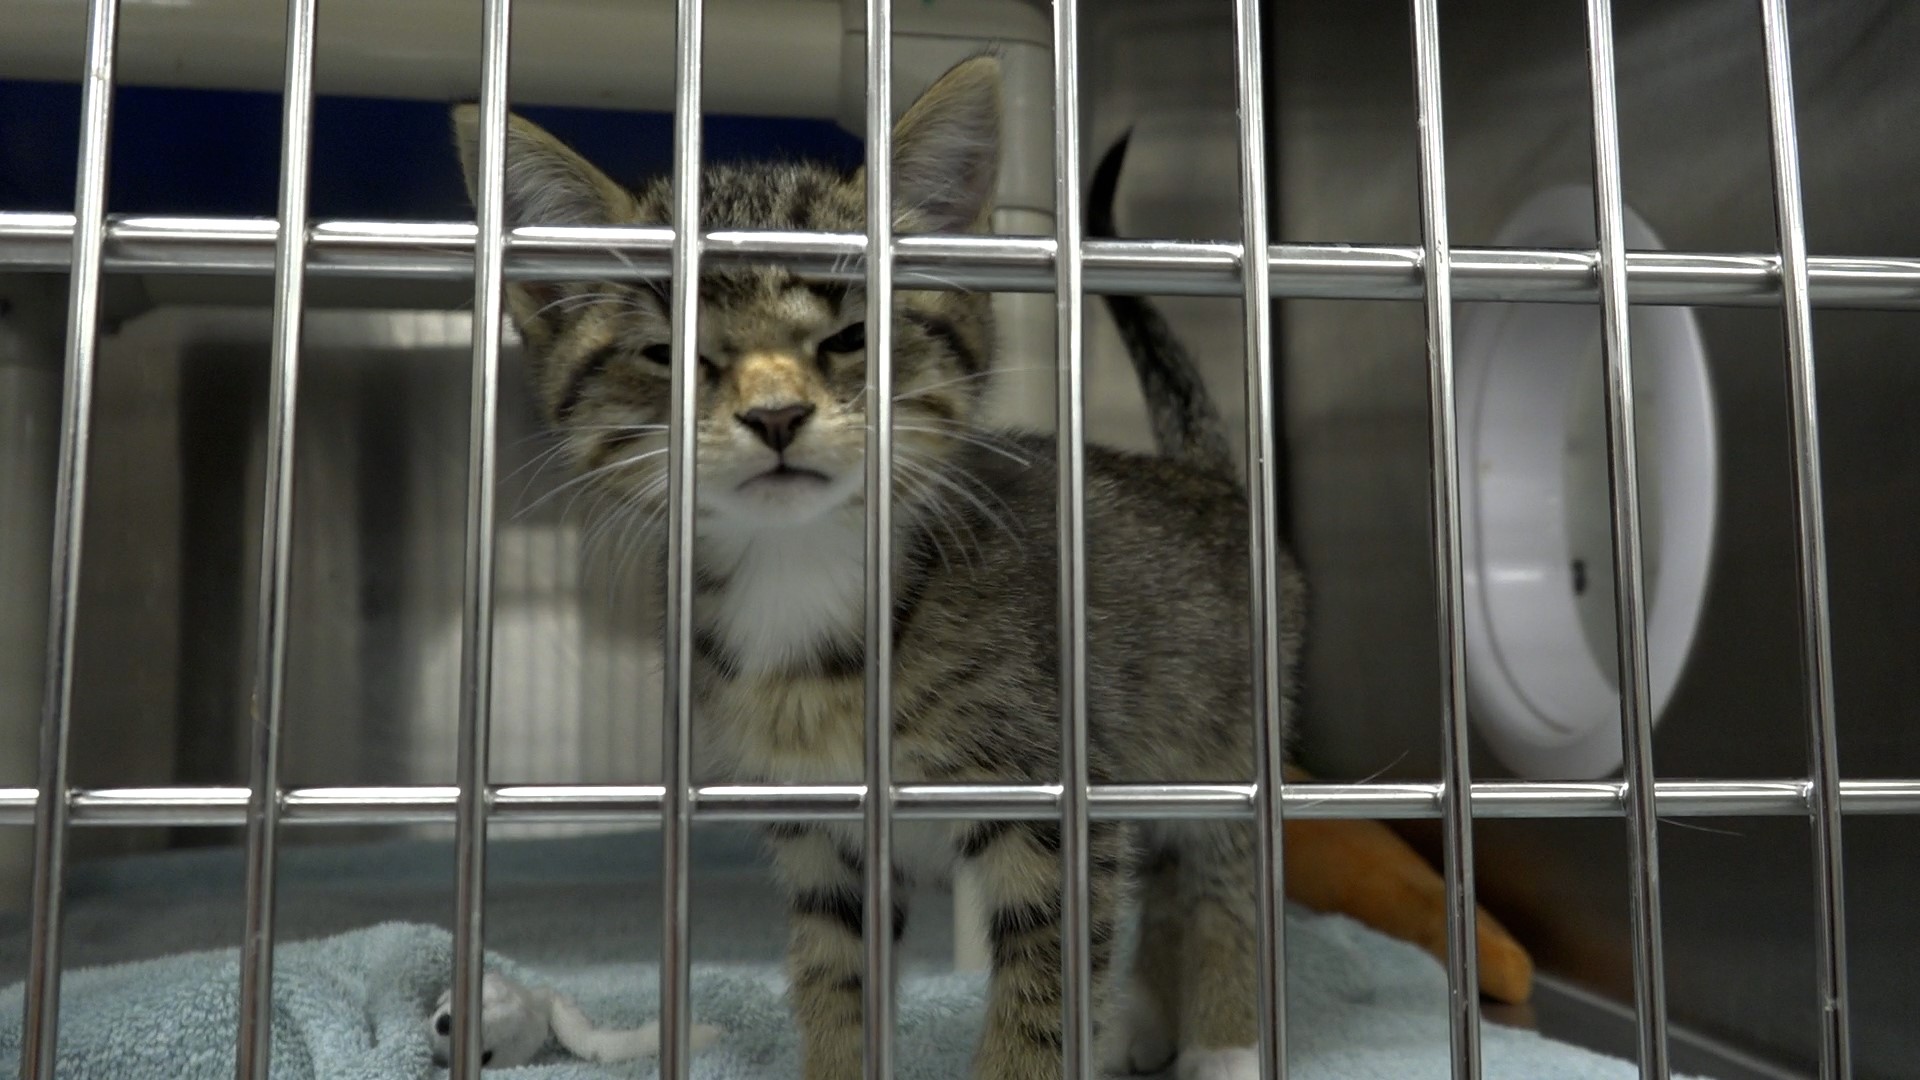 One way you can help animal shelters is by spaying and neutering |  